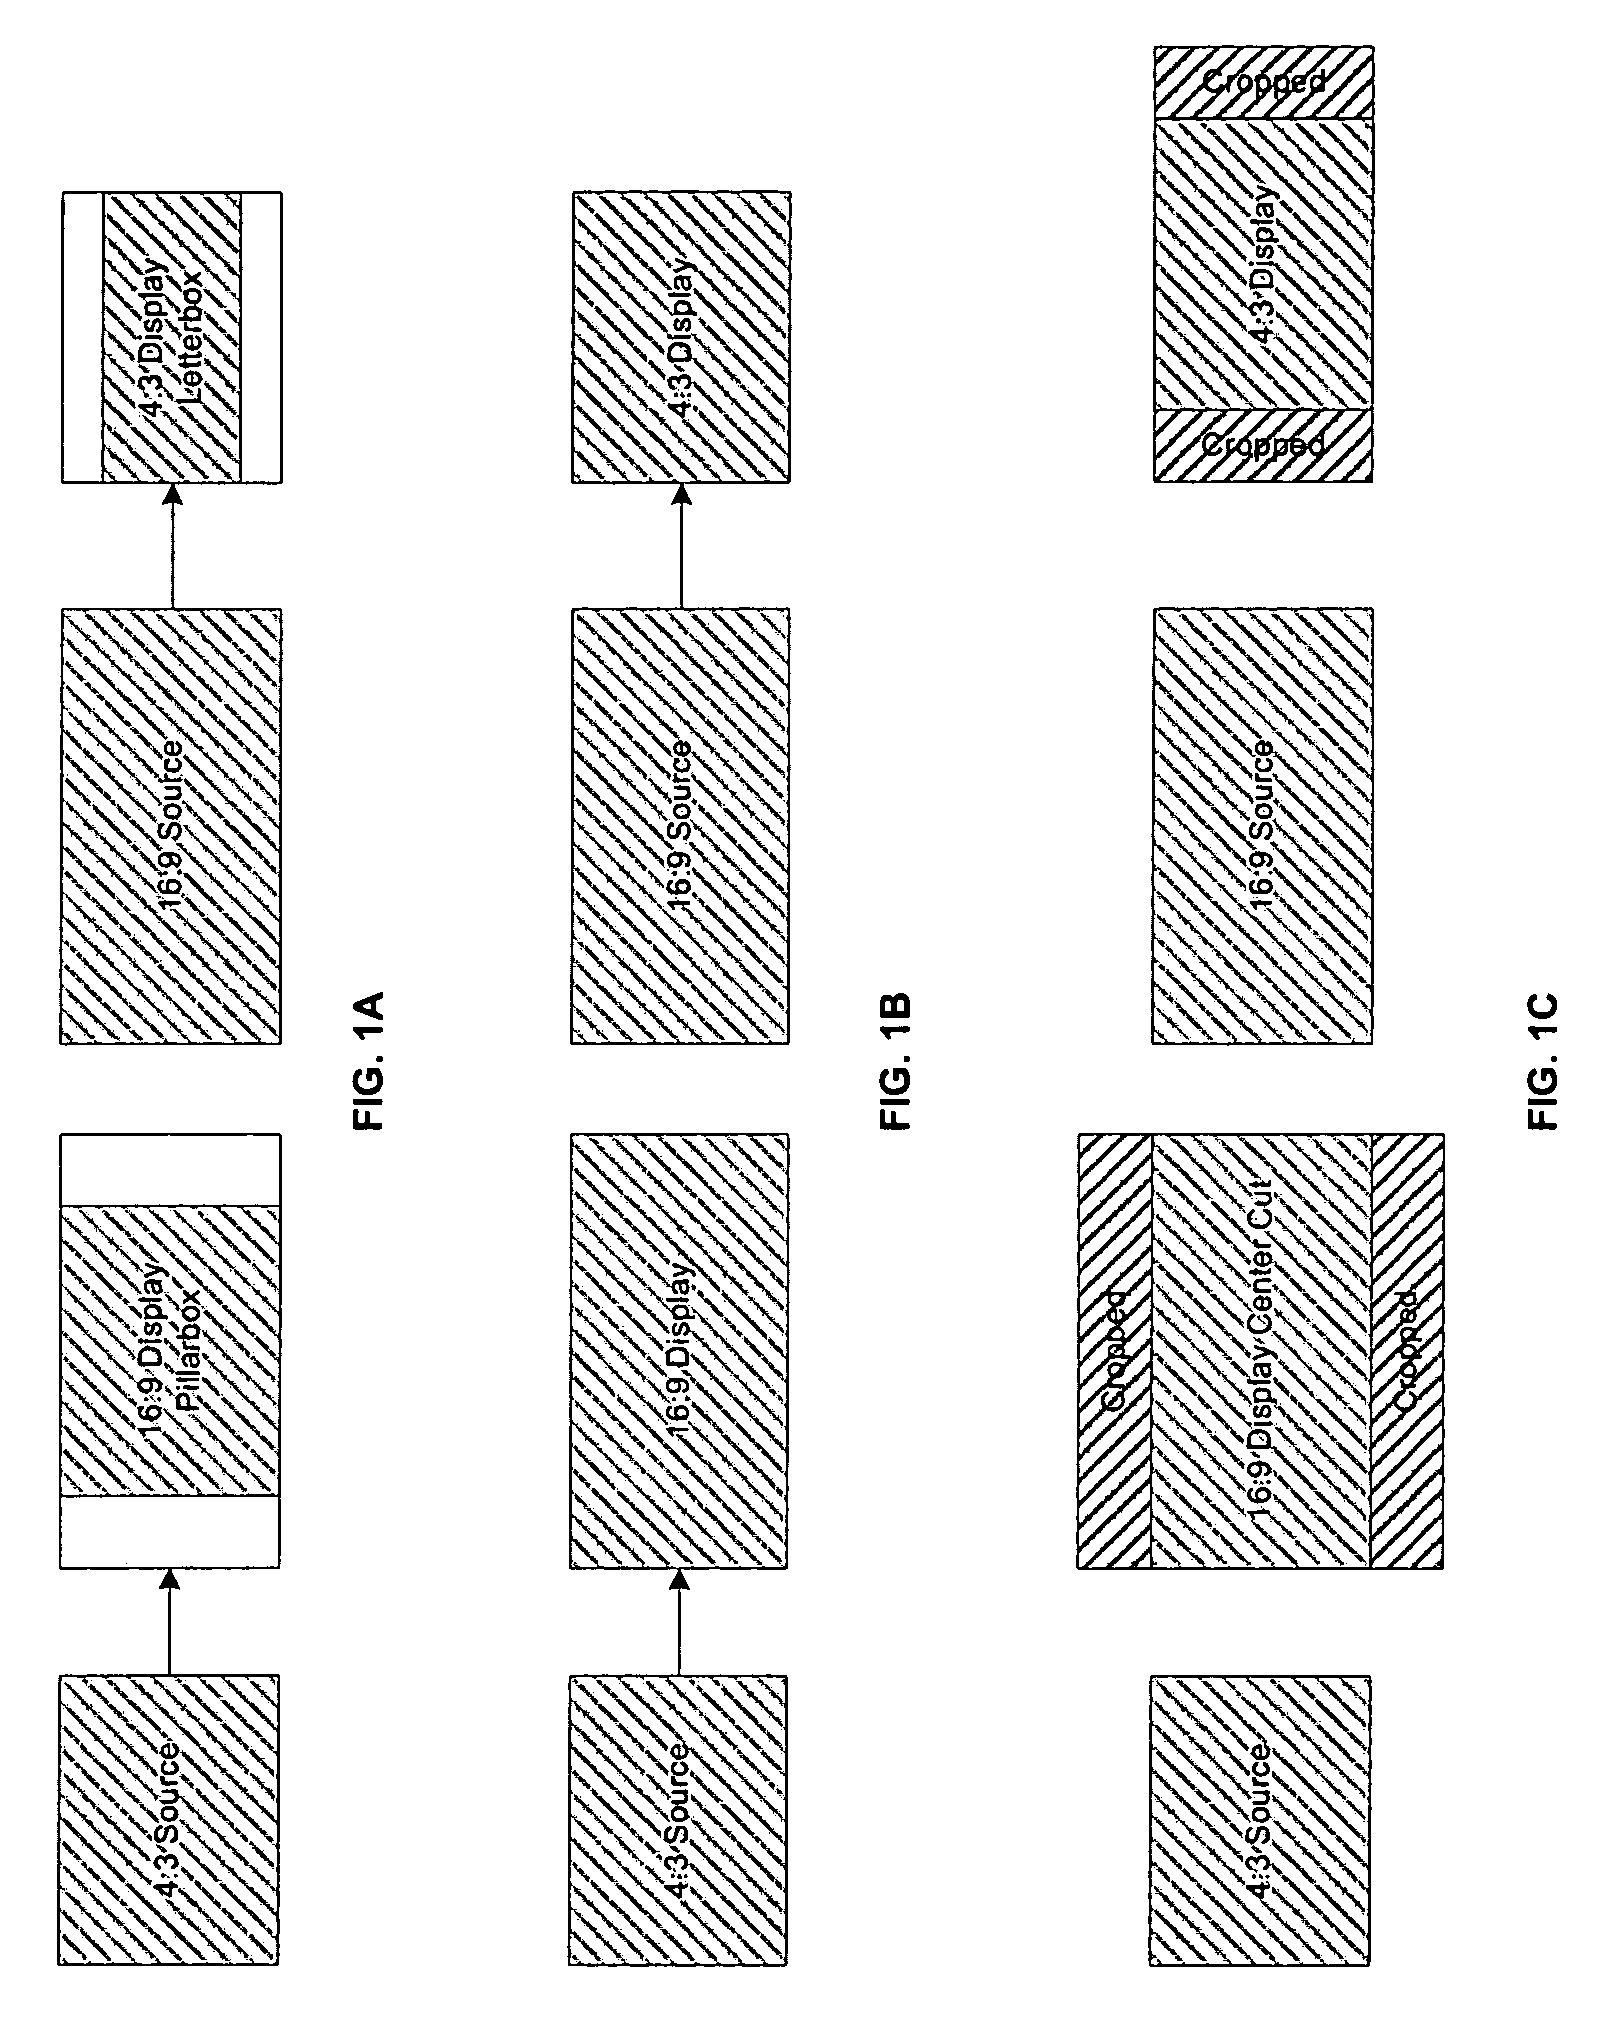 Method and system for automatic detection and display of aspect ratio